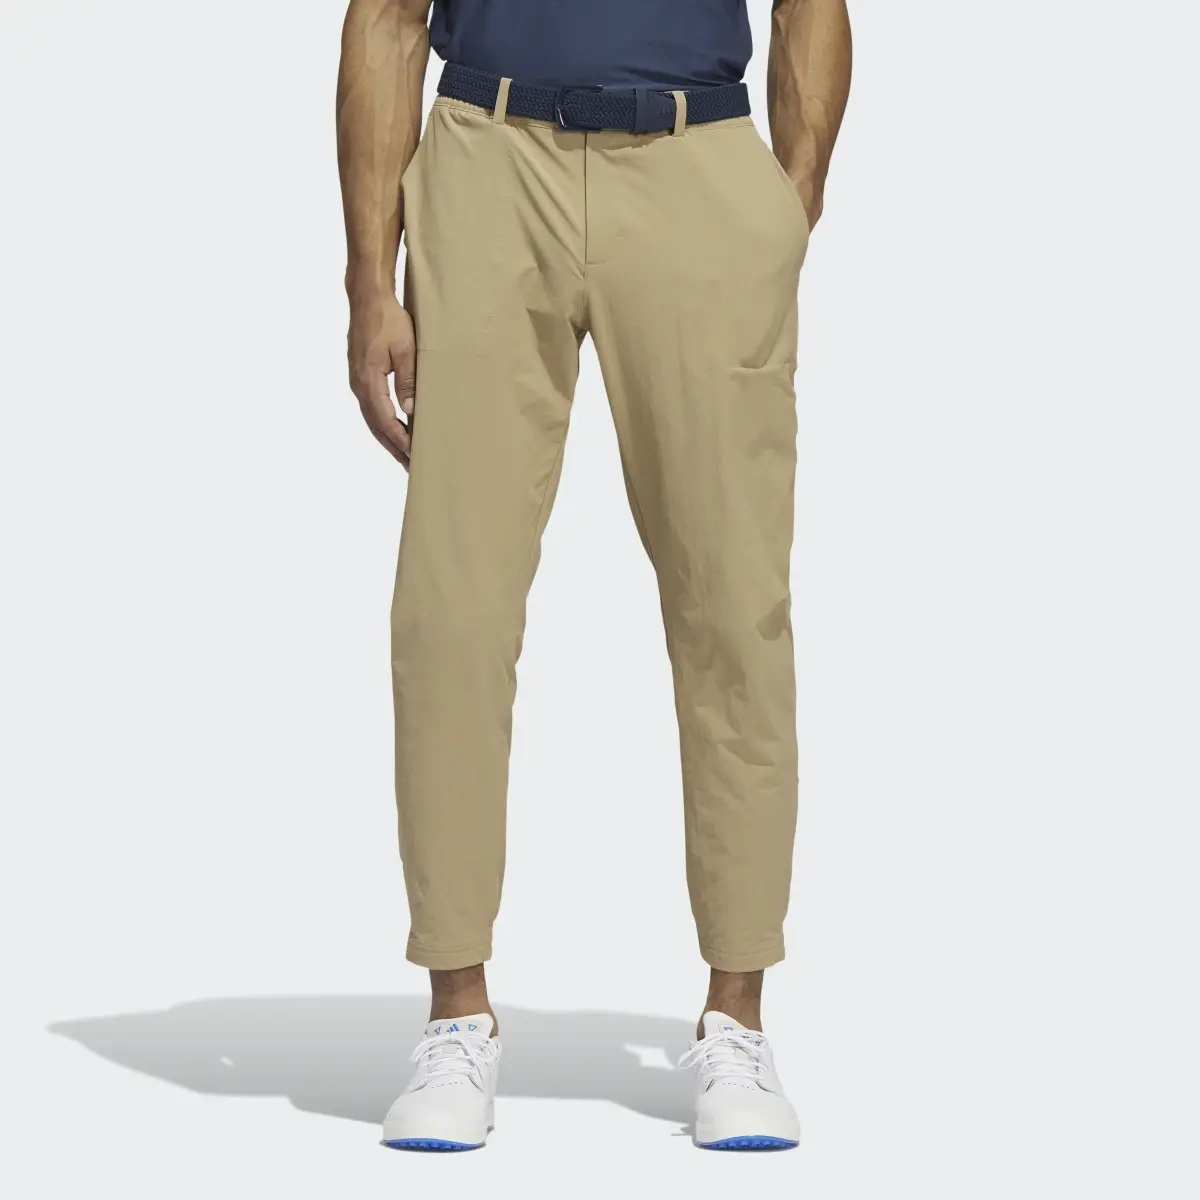 Adidas Go-To Commuter Pants. 1